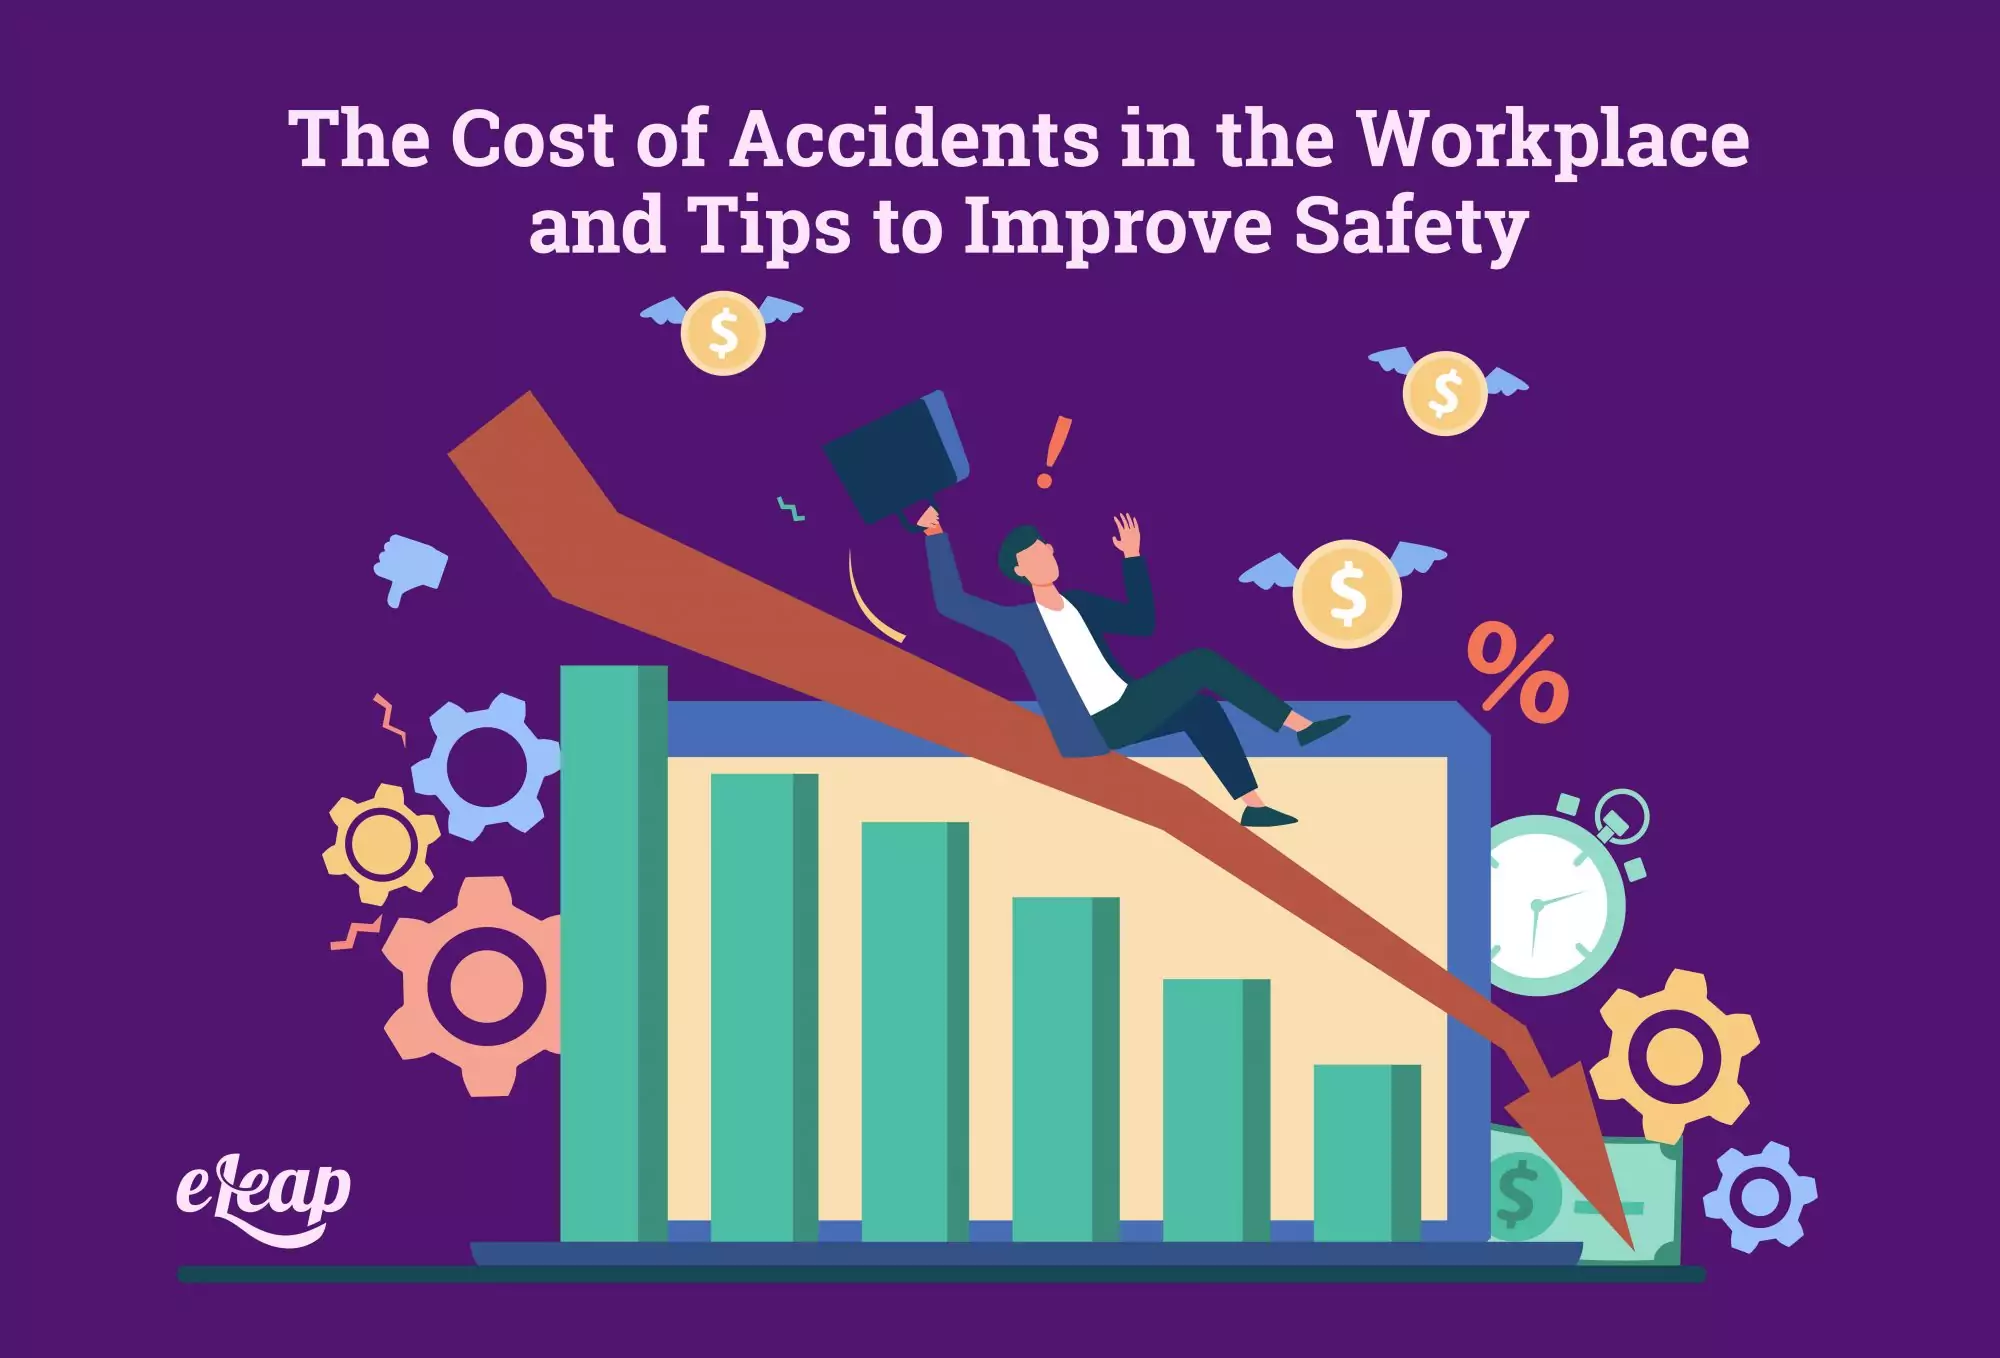 The Cost of Accidents in the Workplace and Tips to Improve Safety